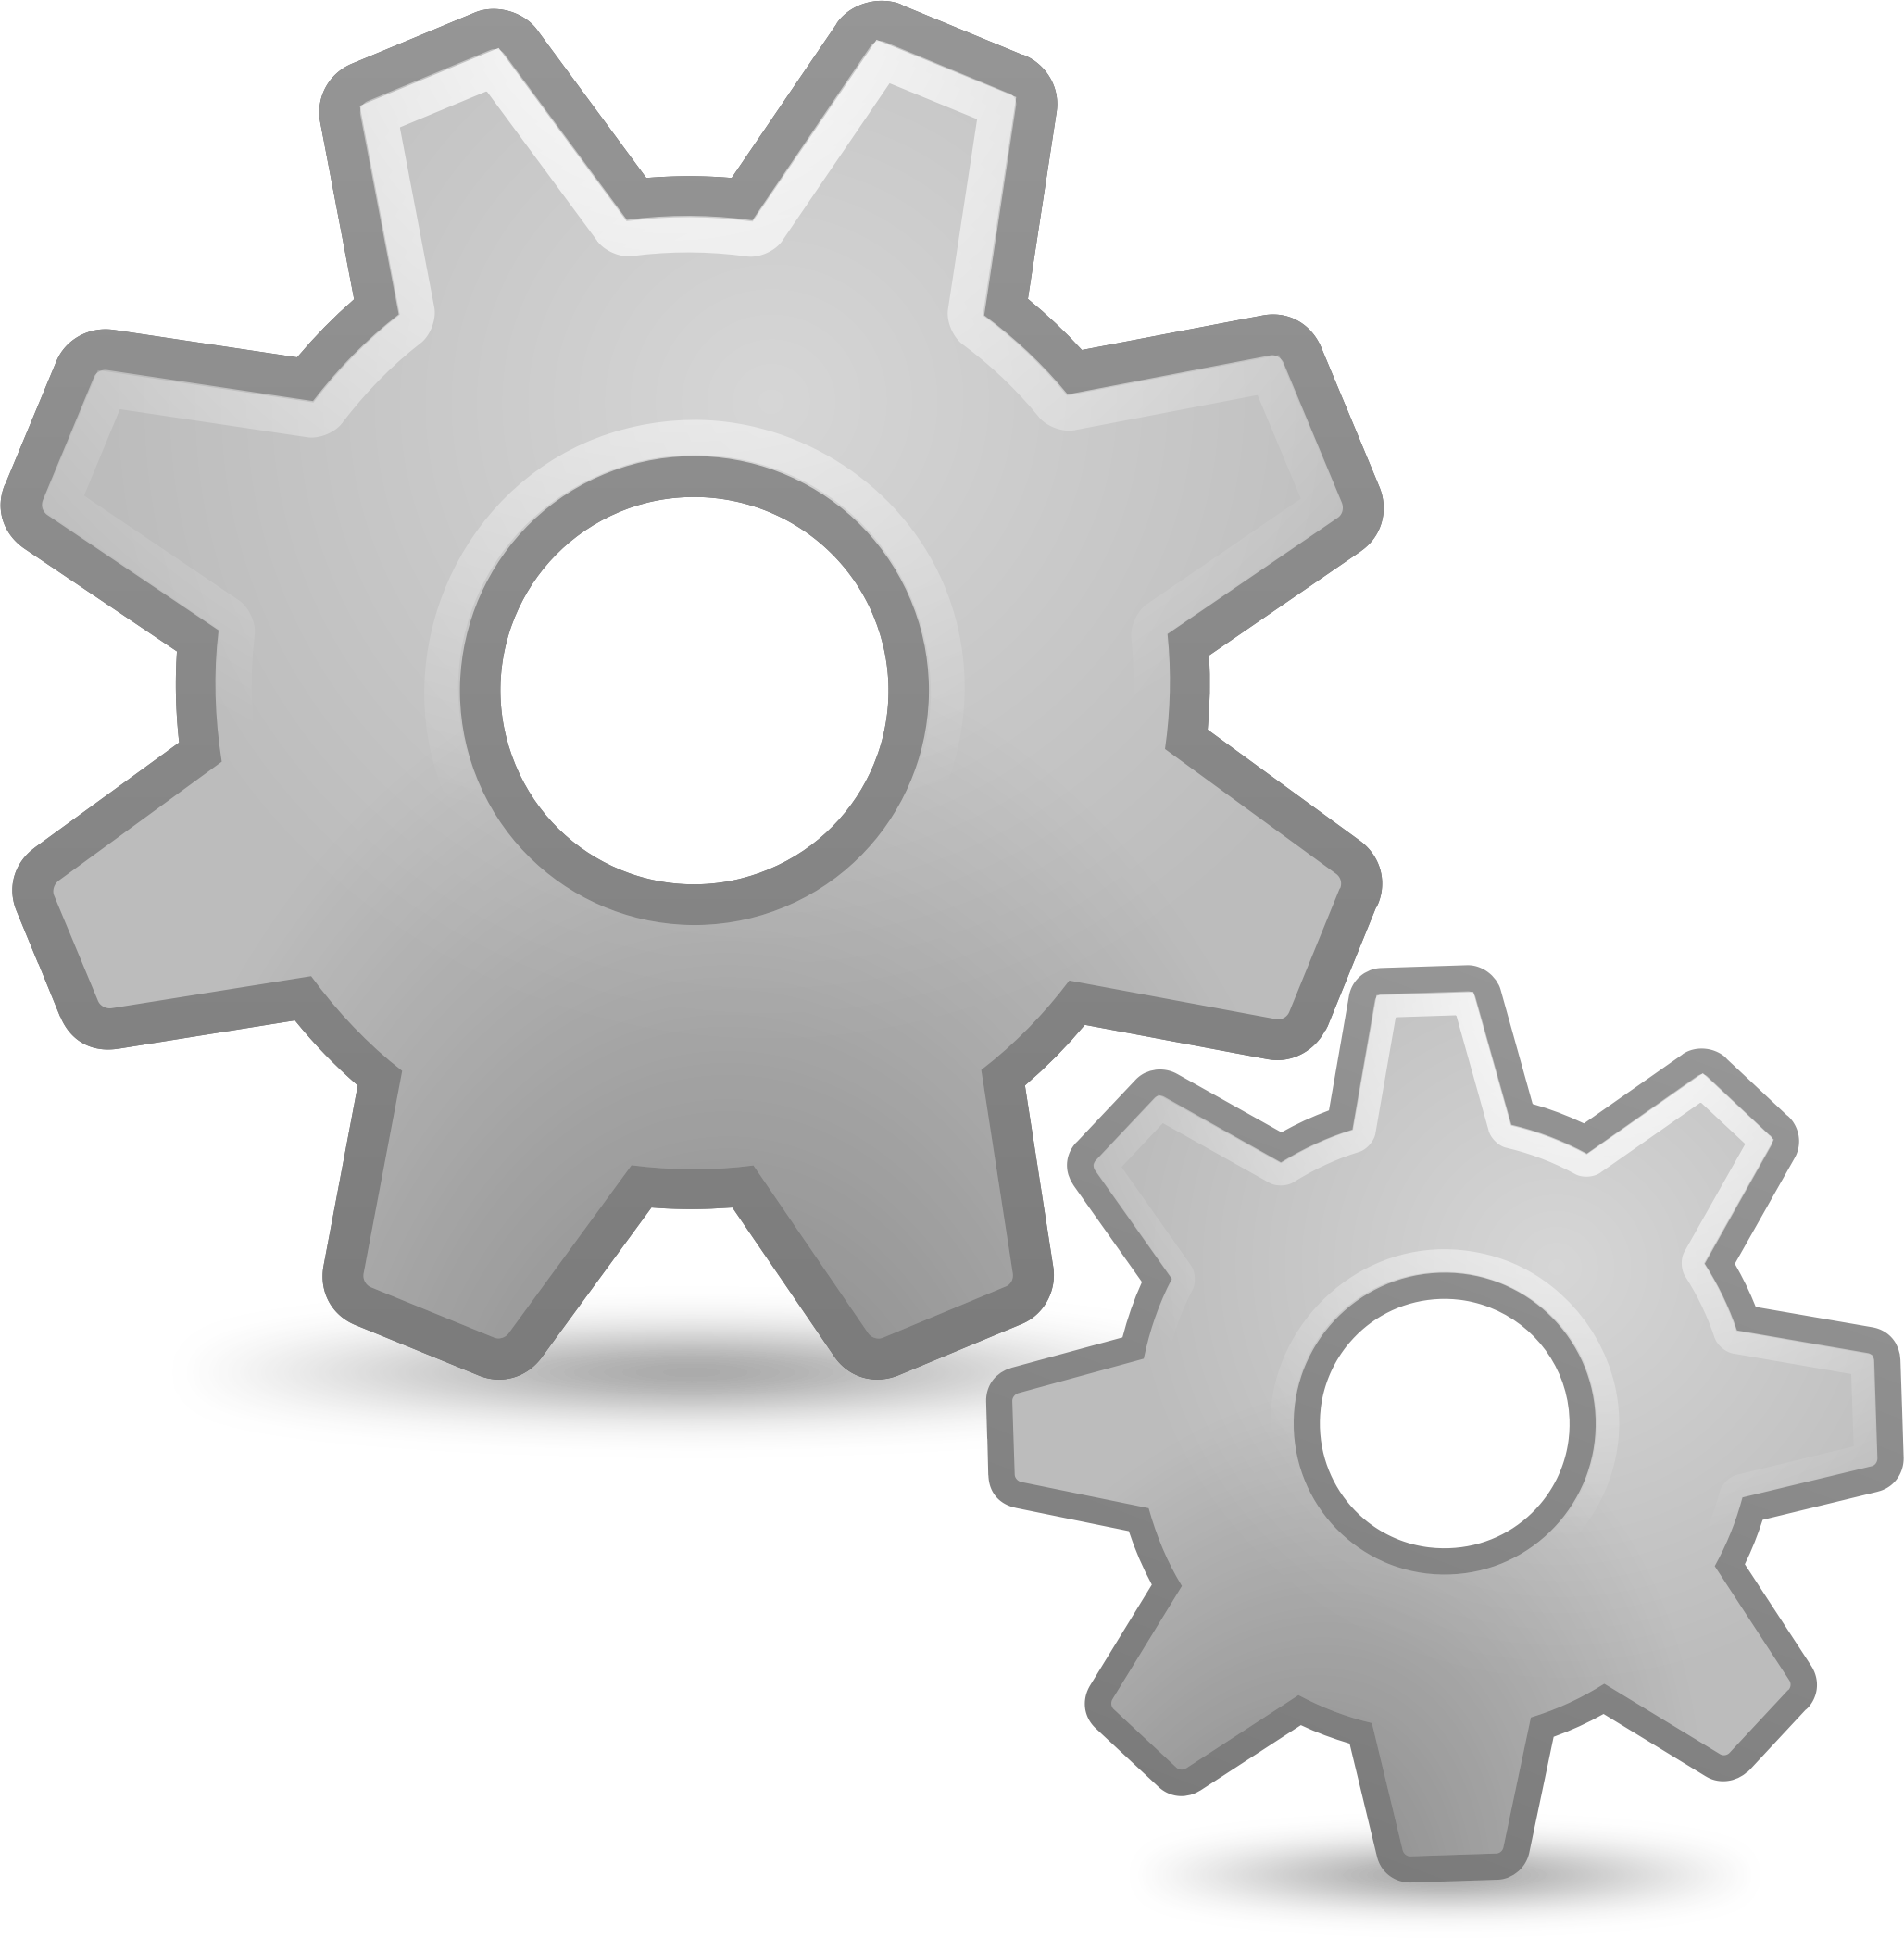 Gears big image png. Gear clipart many gear